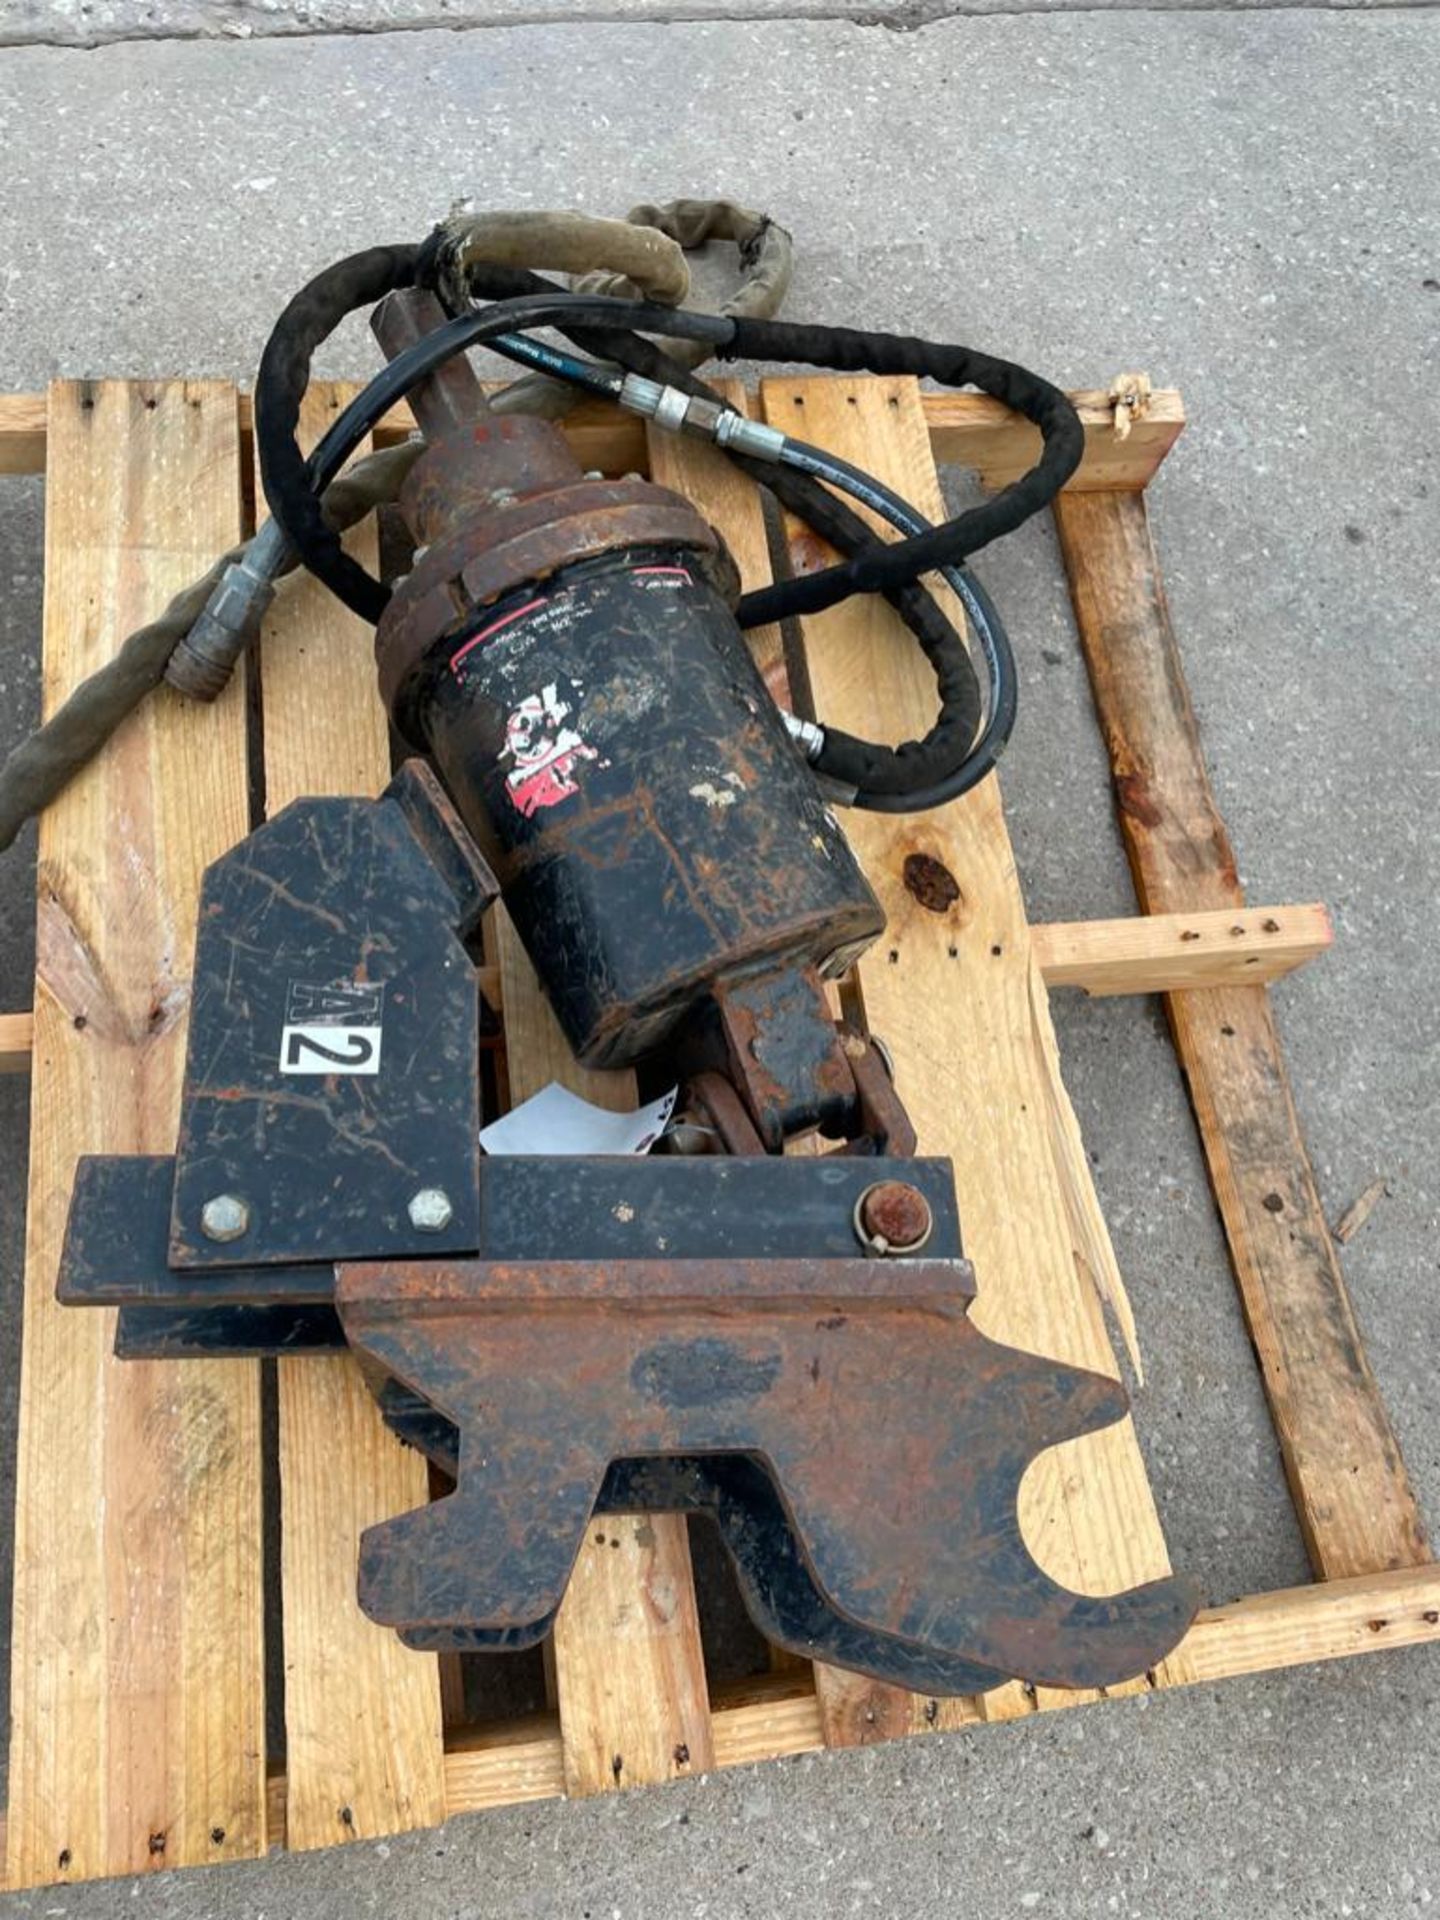 Worksite PA30 Hydraulic Post Hole Digger Attachment. Located in Hazelwood, MO - Image 5 of 5